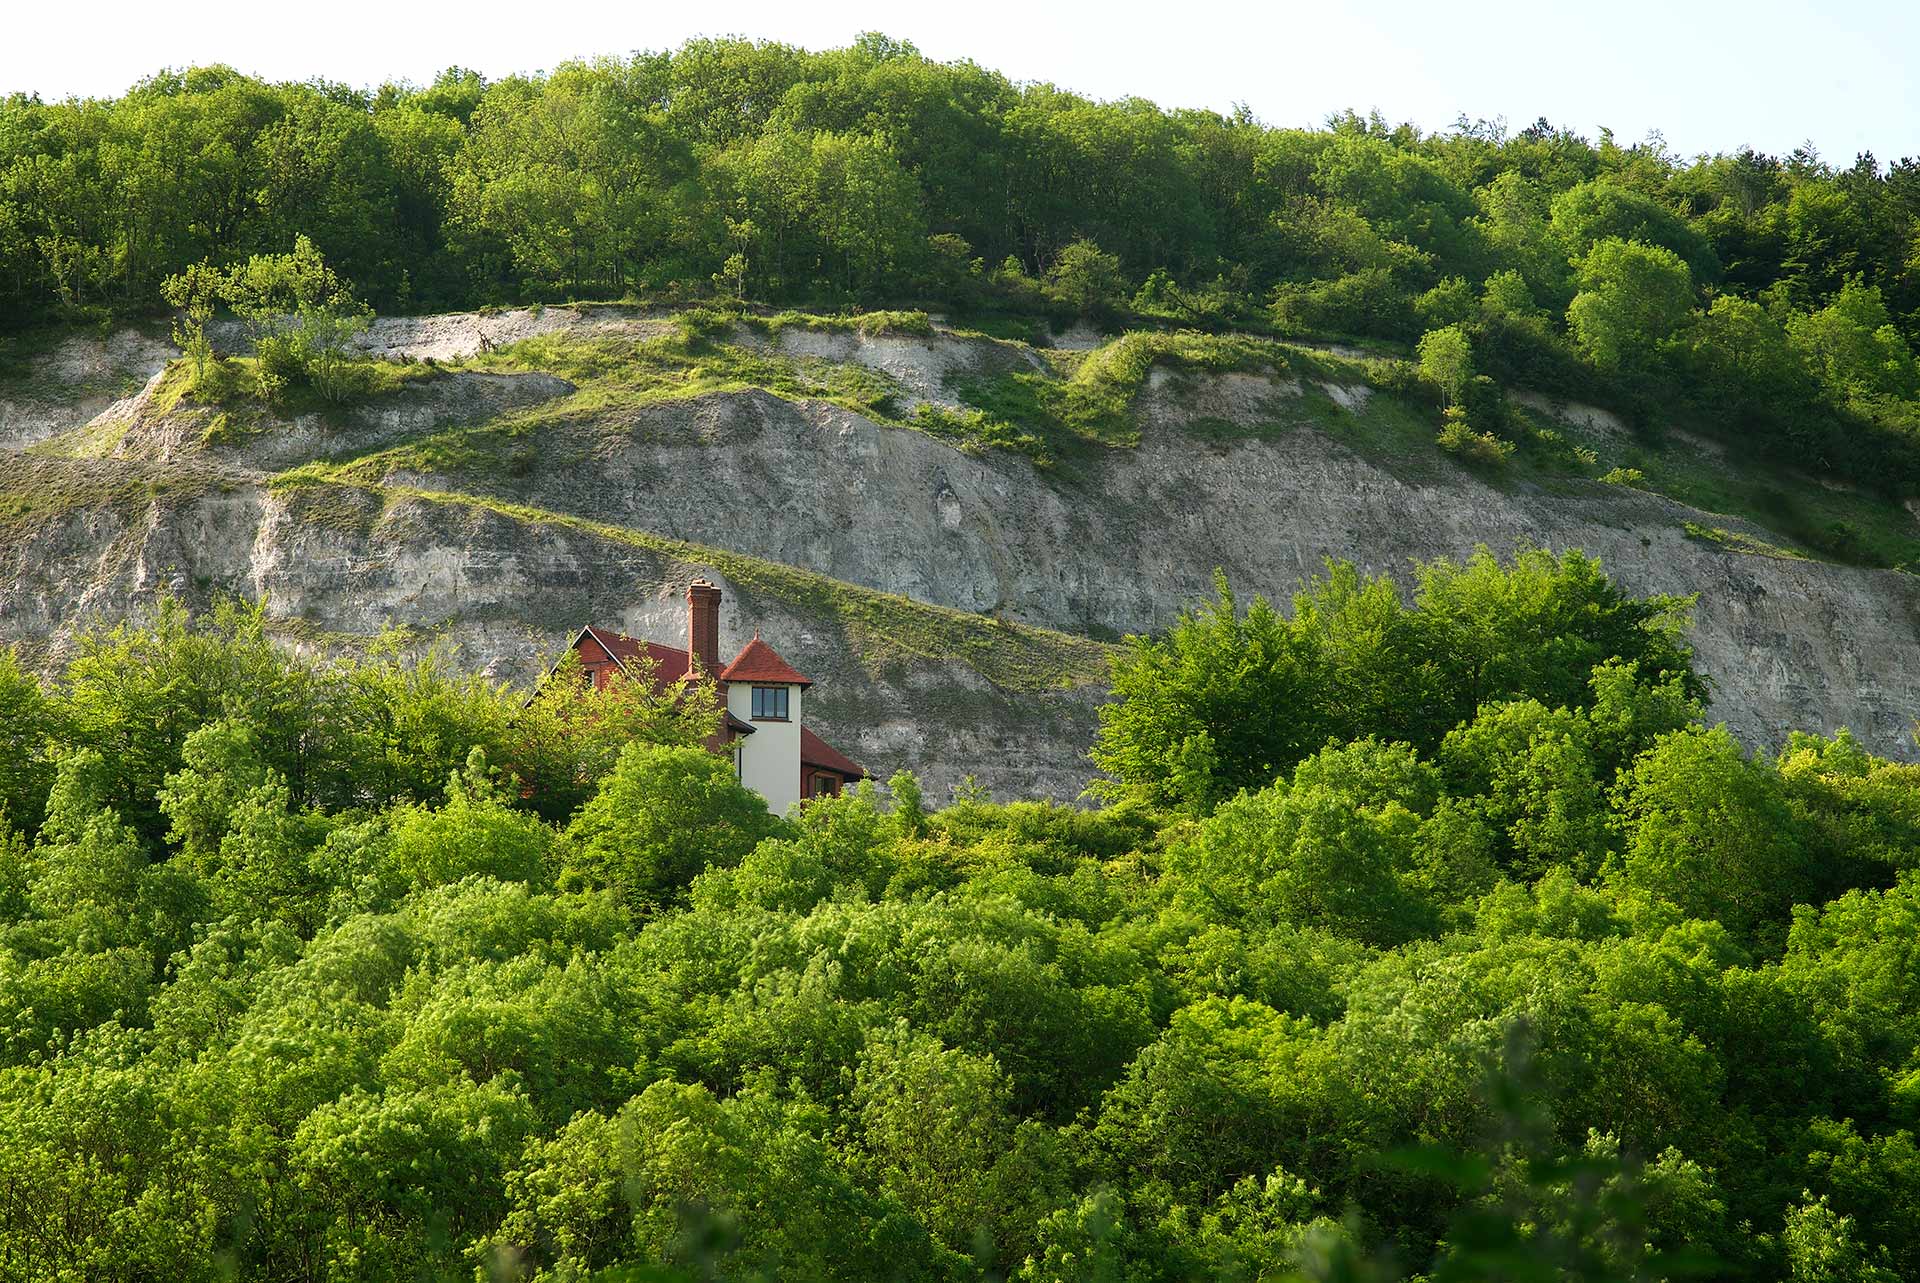 red tiled roof house behind the trees in a quarry